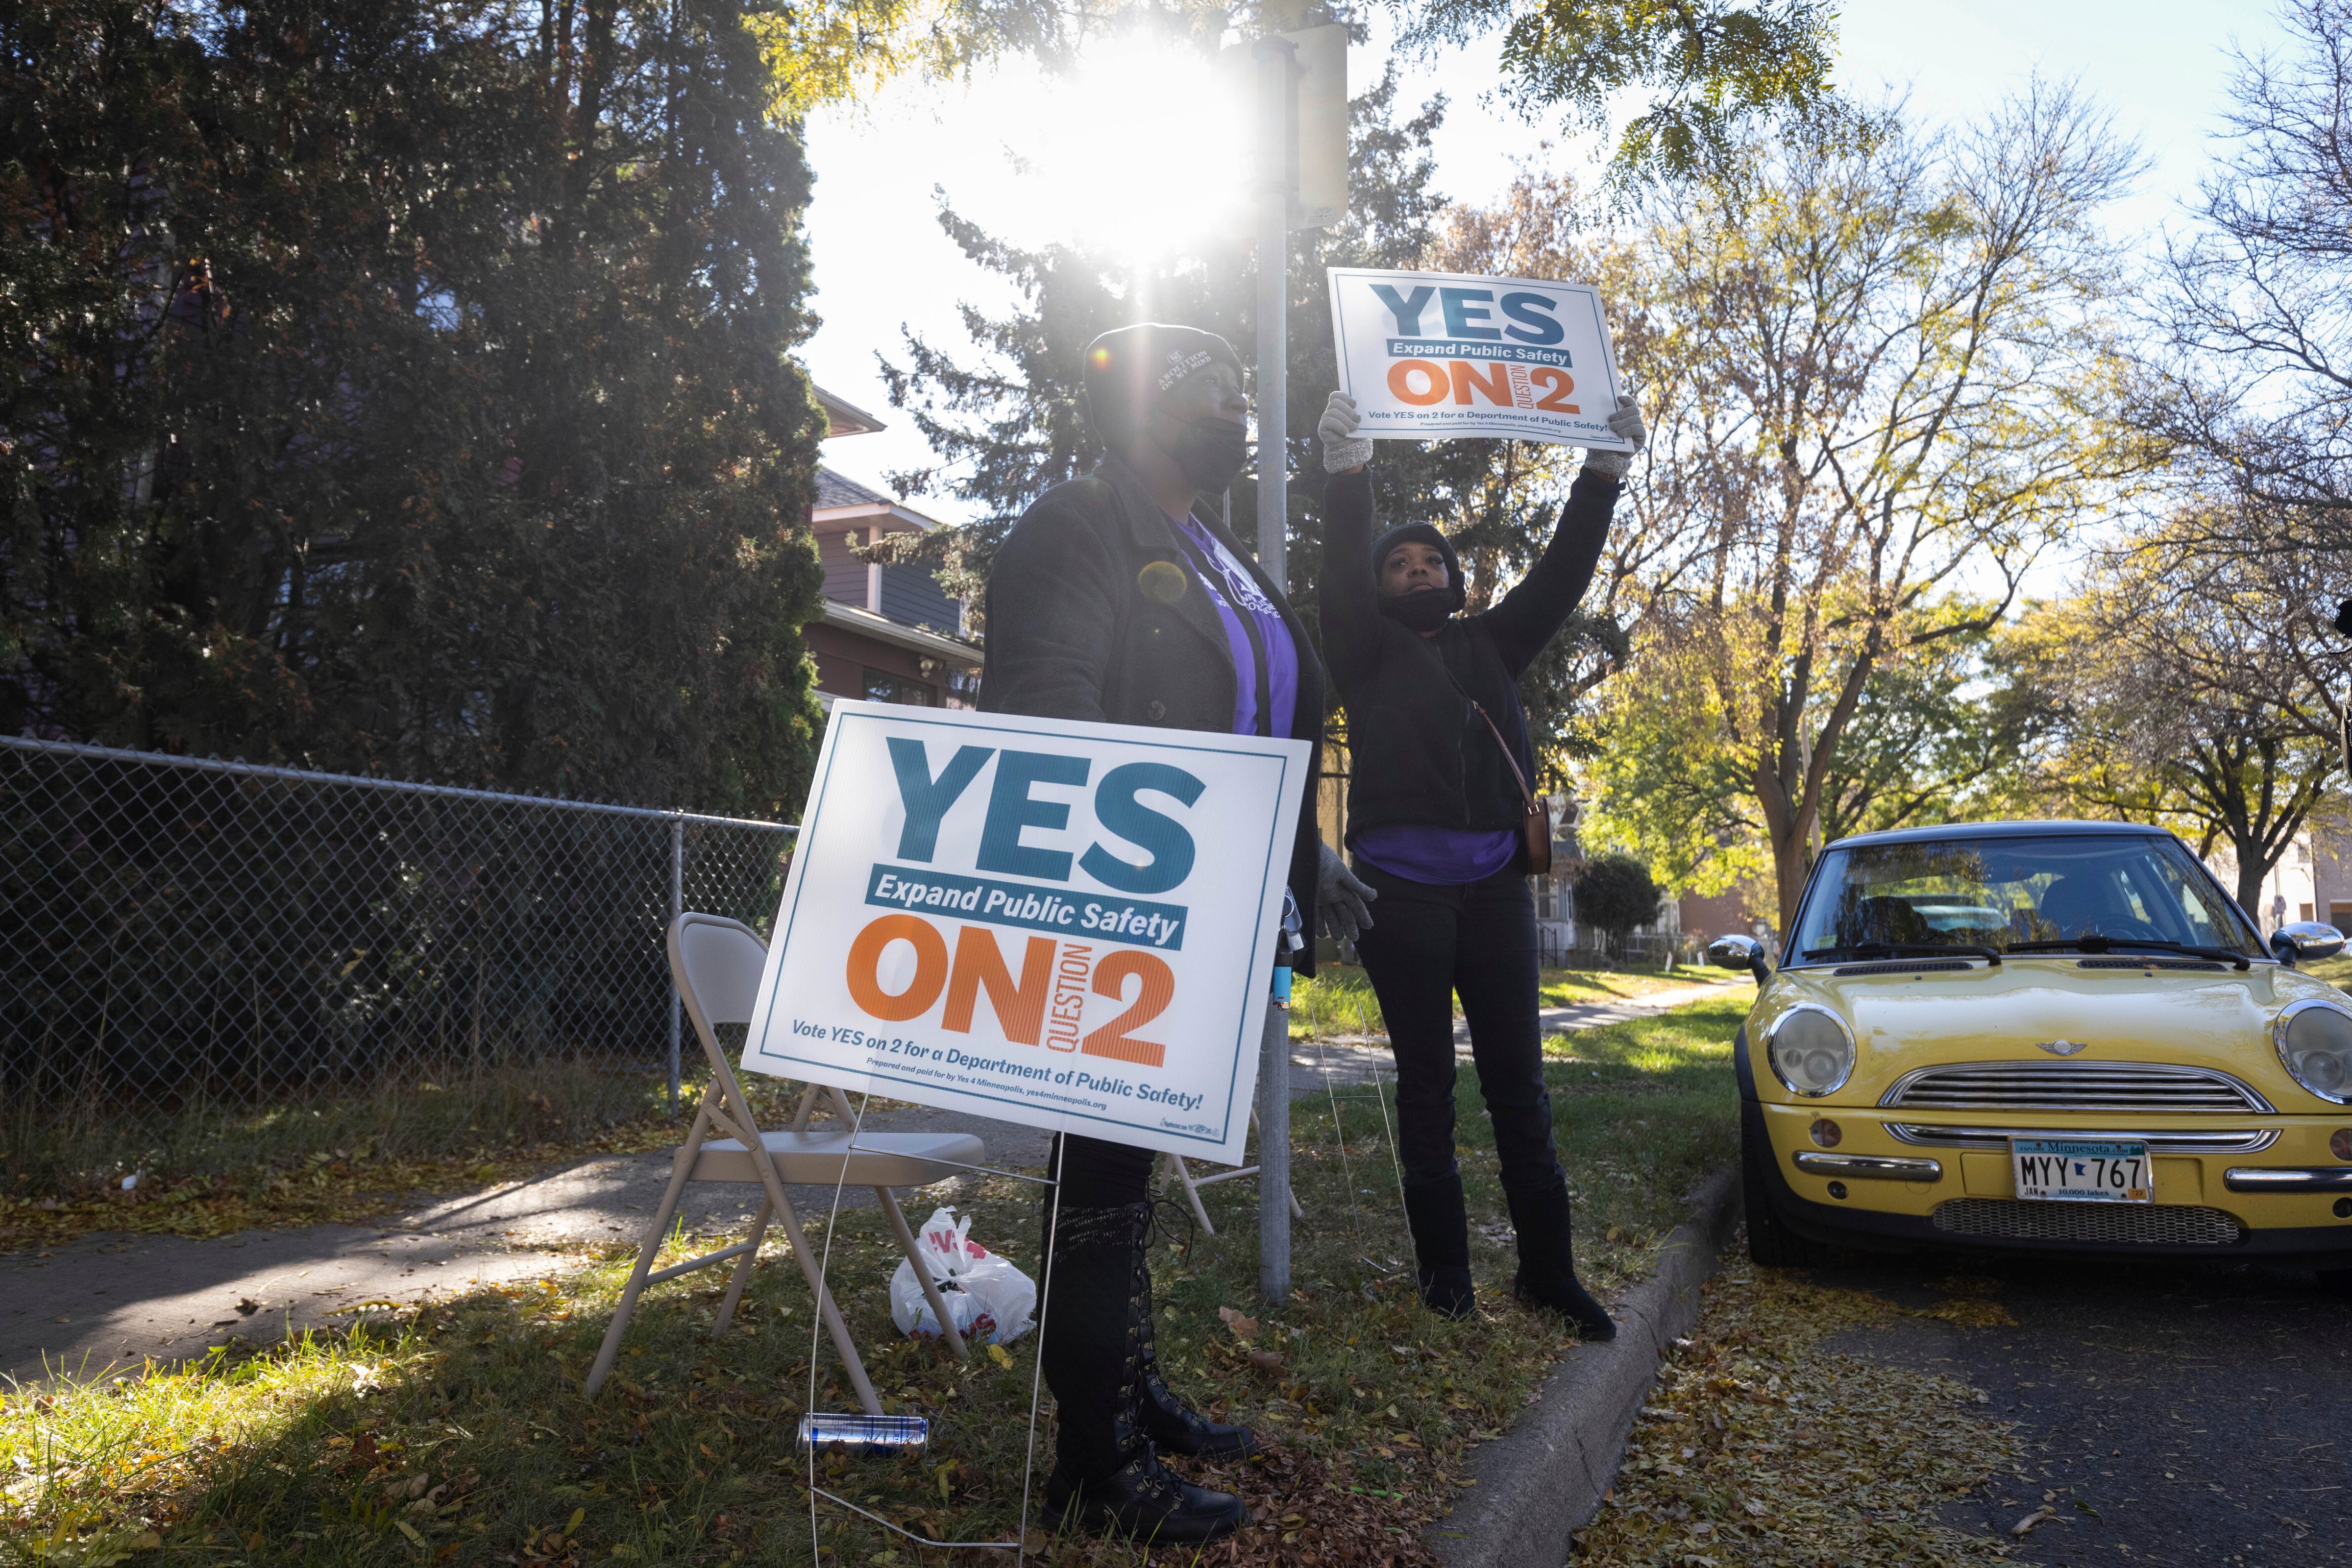 Volunteers urge community members to vote yes on ballot question two outside of a polling place on Tuesday, Nov. 2, 2021 in Minneapolis. Despite the disappointment from activists and community leaders on the results of the vote, they are now looking forward to the next steps in addressing public safety issues in the city. (Christian Monterrosa—The AP)